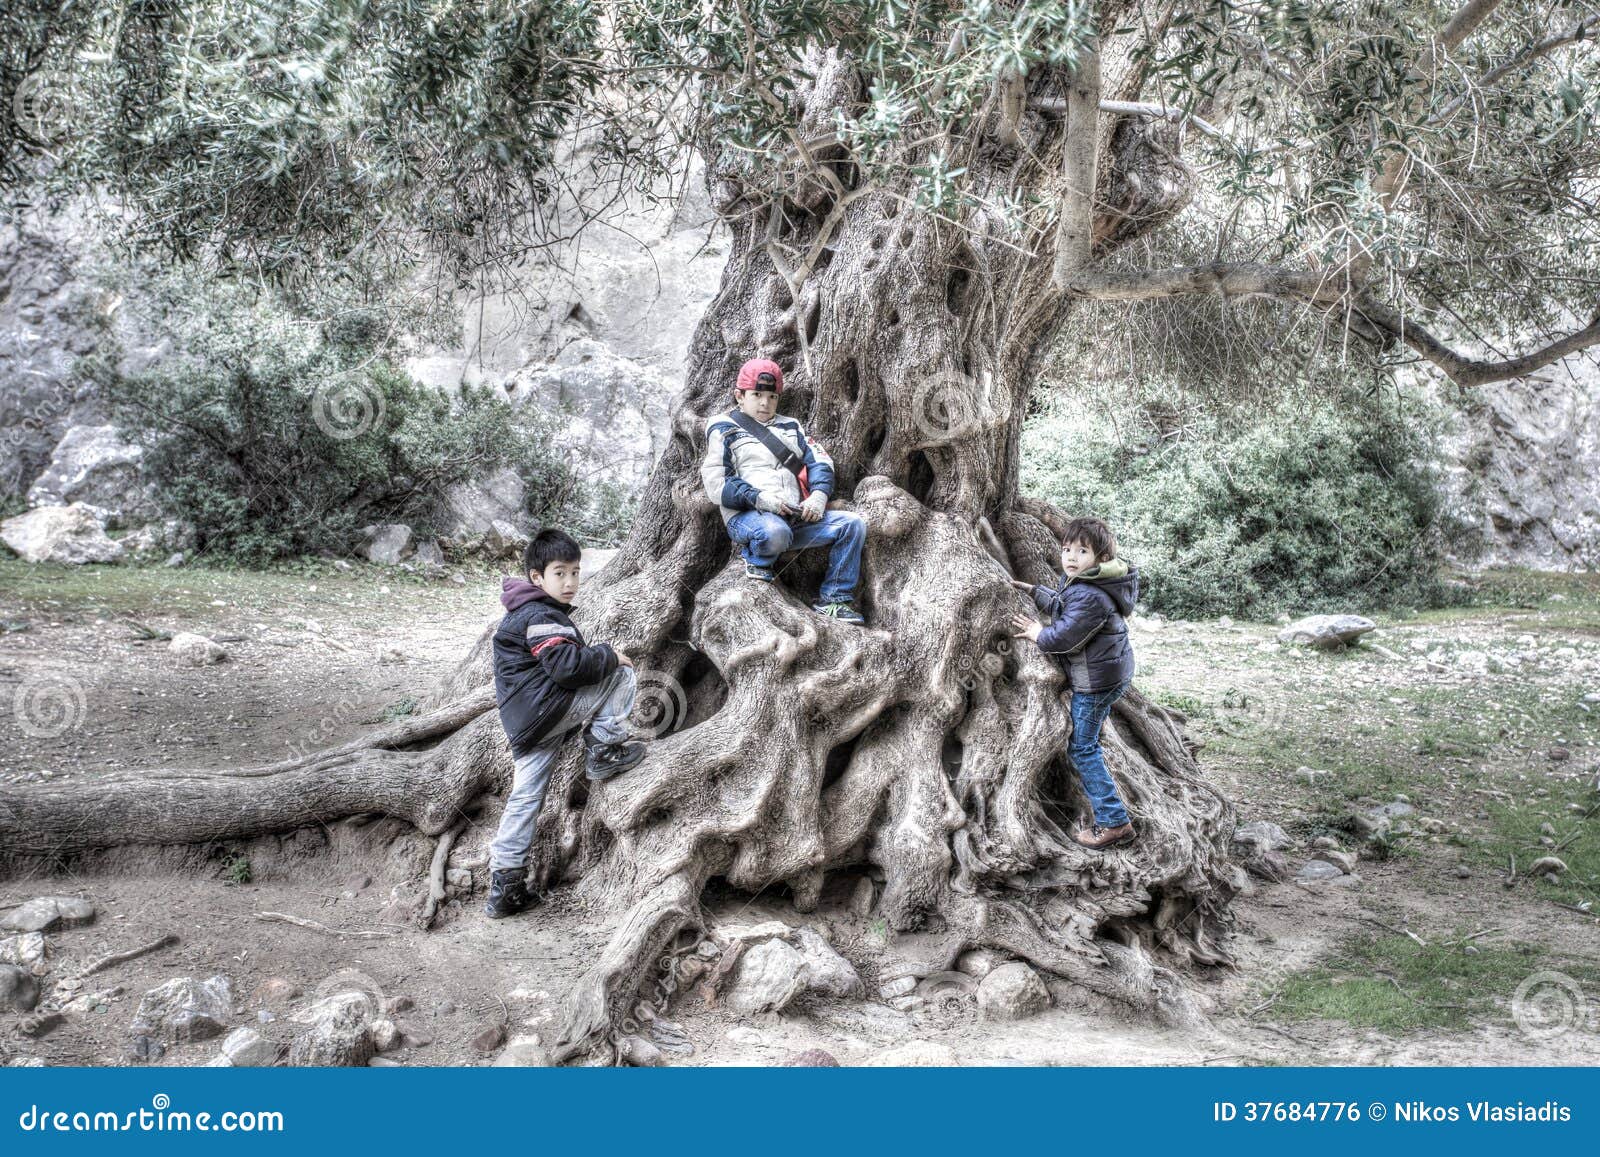 three young children playing on a gnarled tree